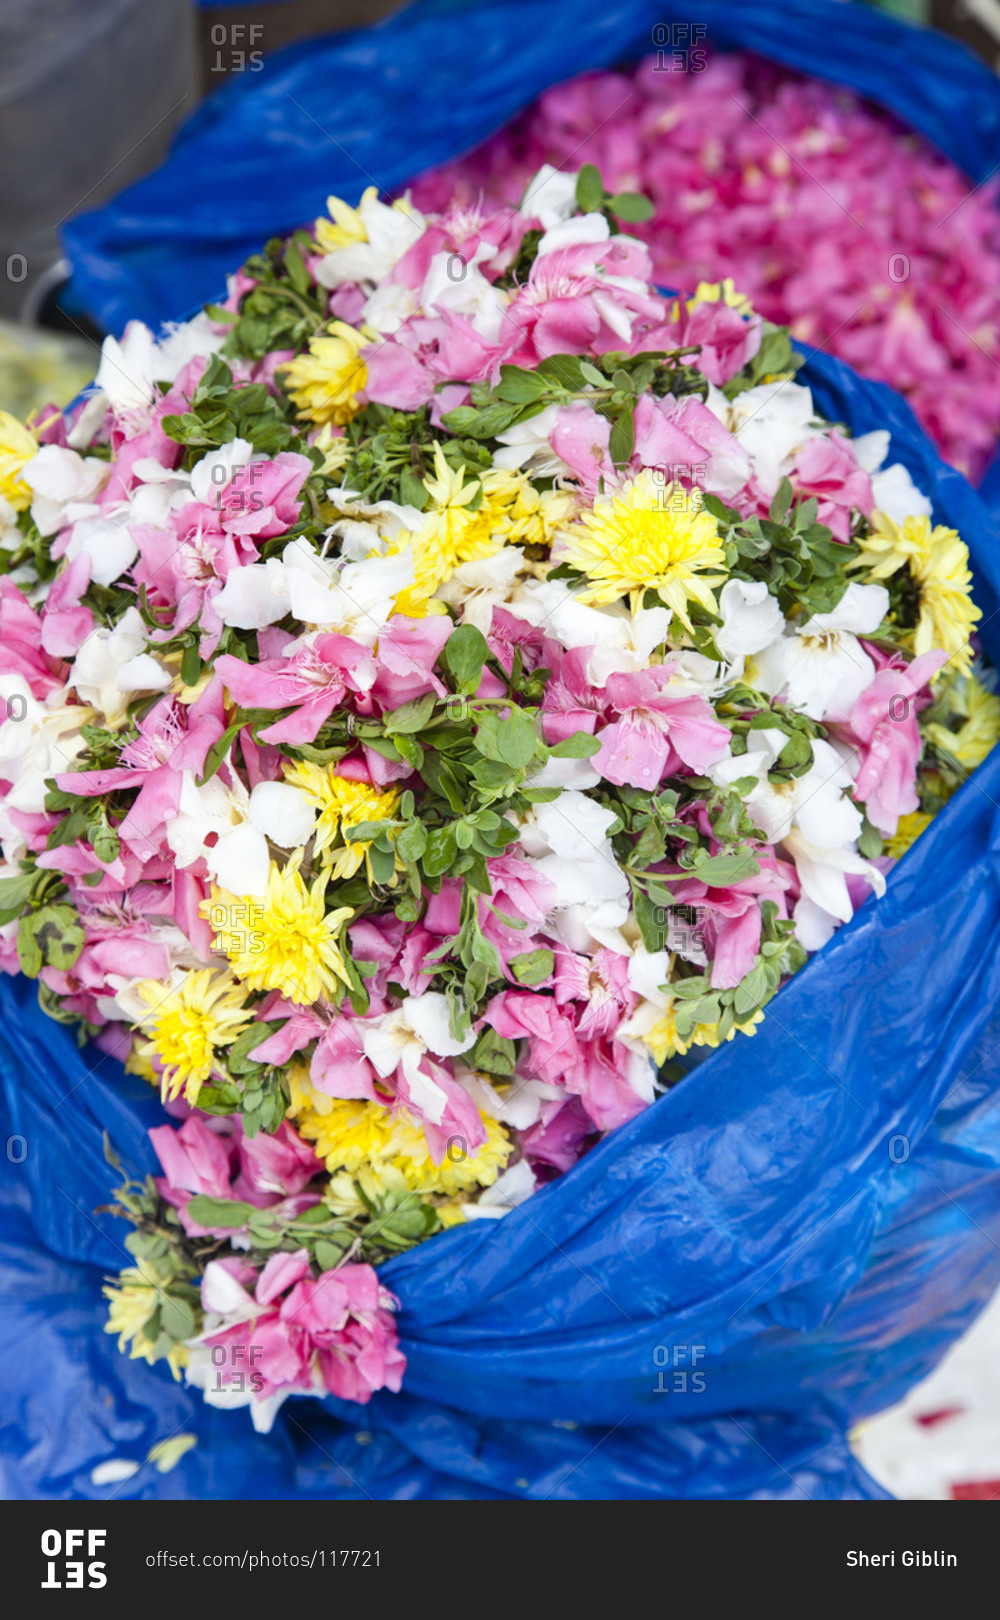 Bags filled with flowers at an Indian flower market